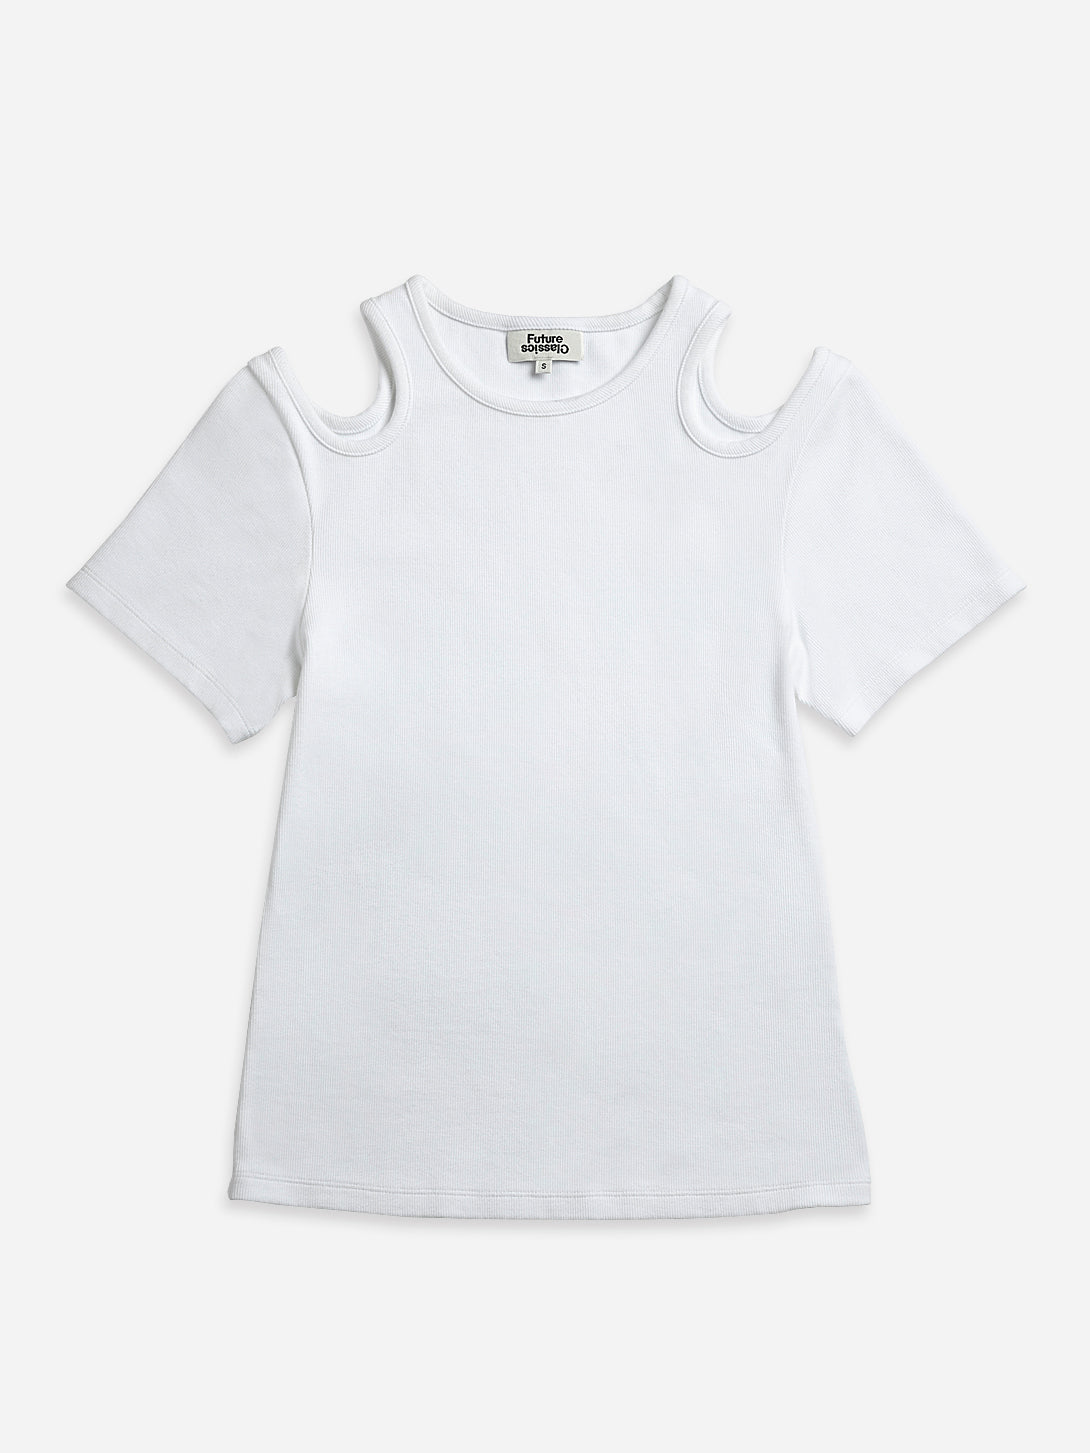 Pure White Shoulder Cut Out Tee Womens Future Classics Summer Short Sleeve